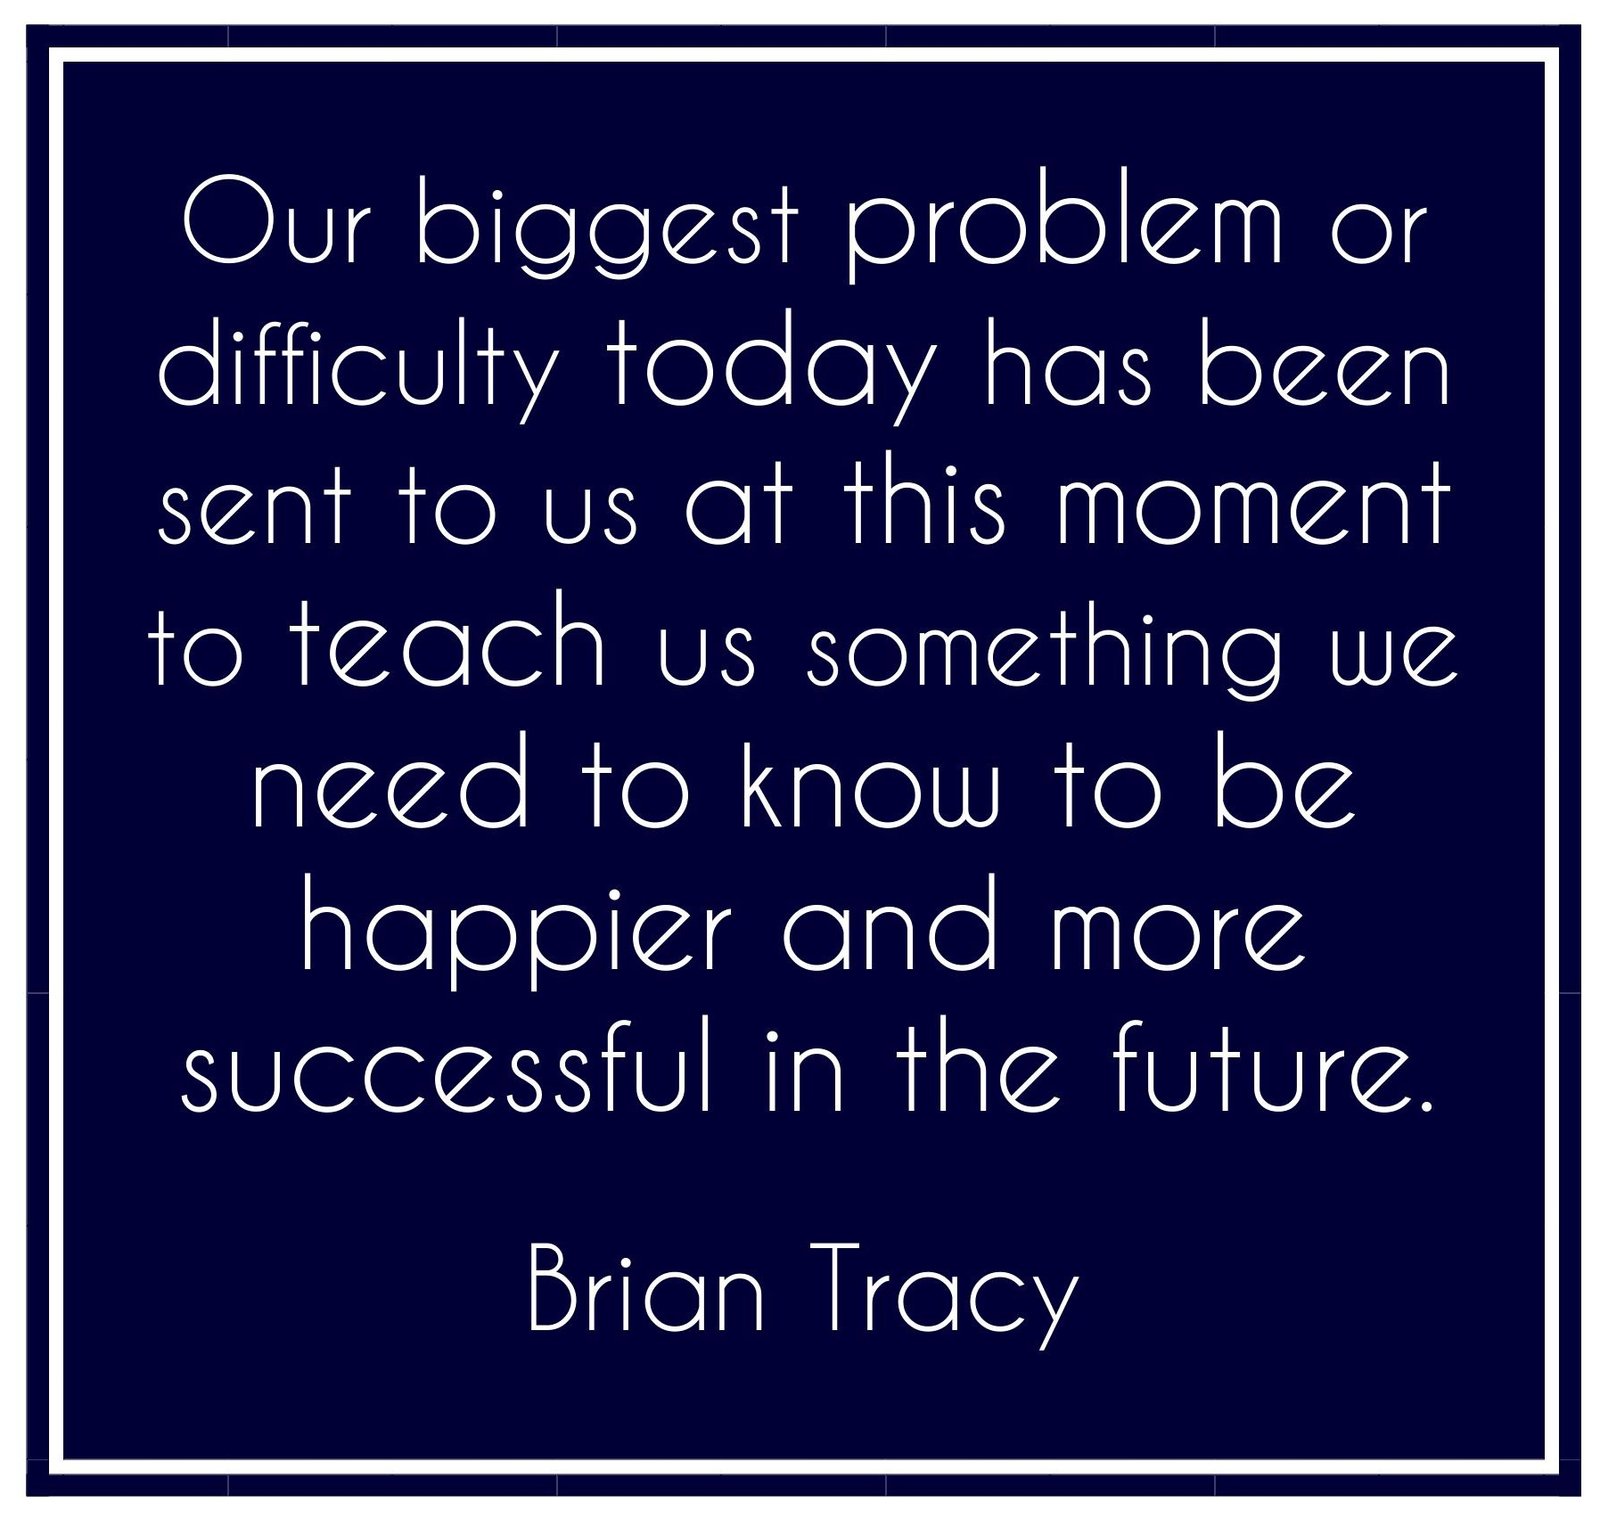 Our biggest problem or difficulty today has been sent to us